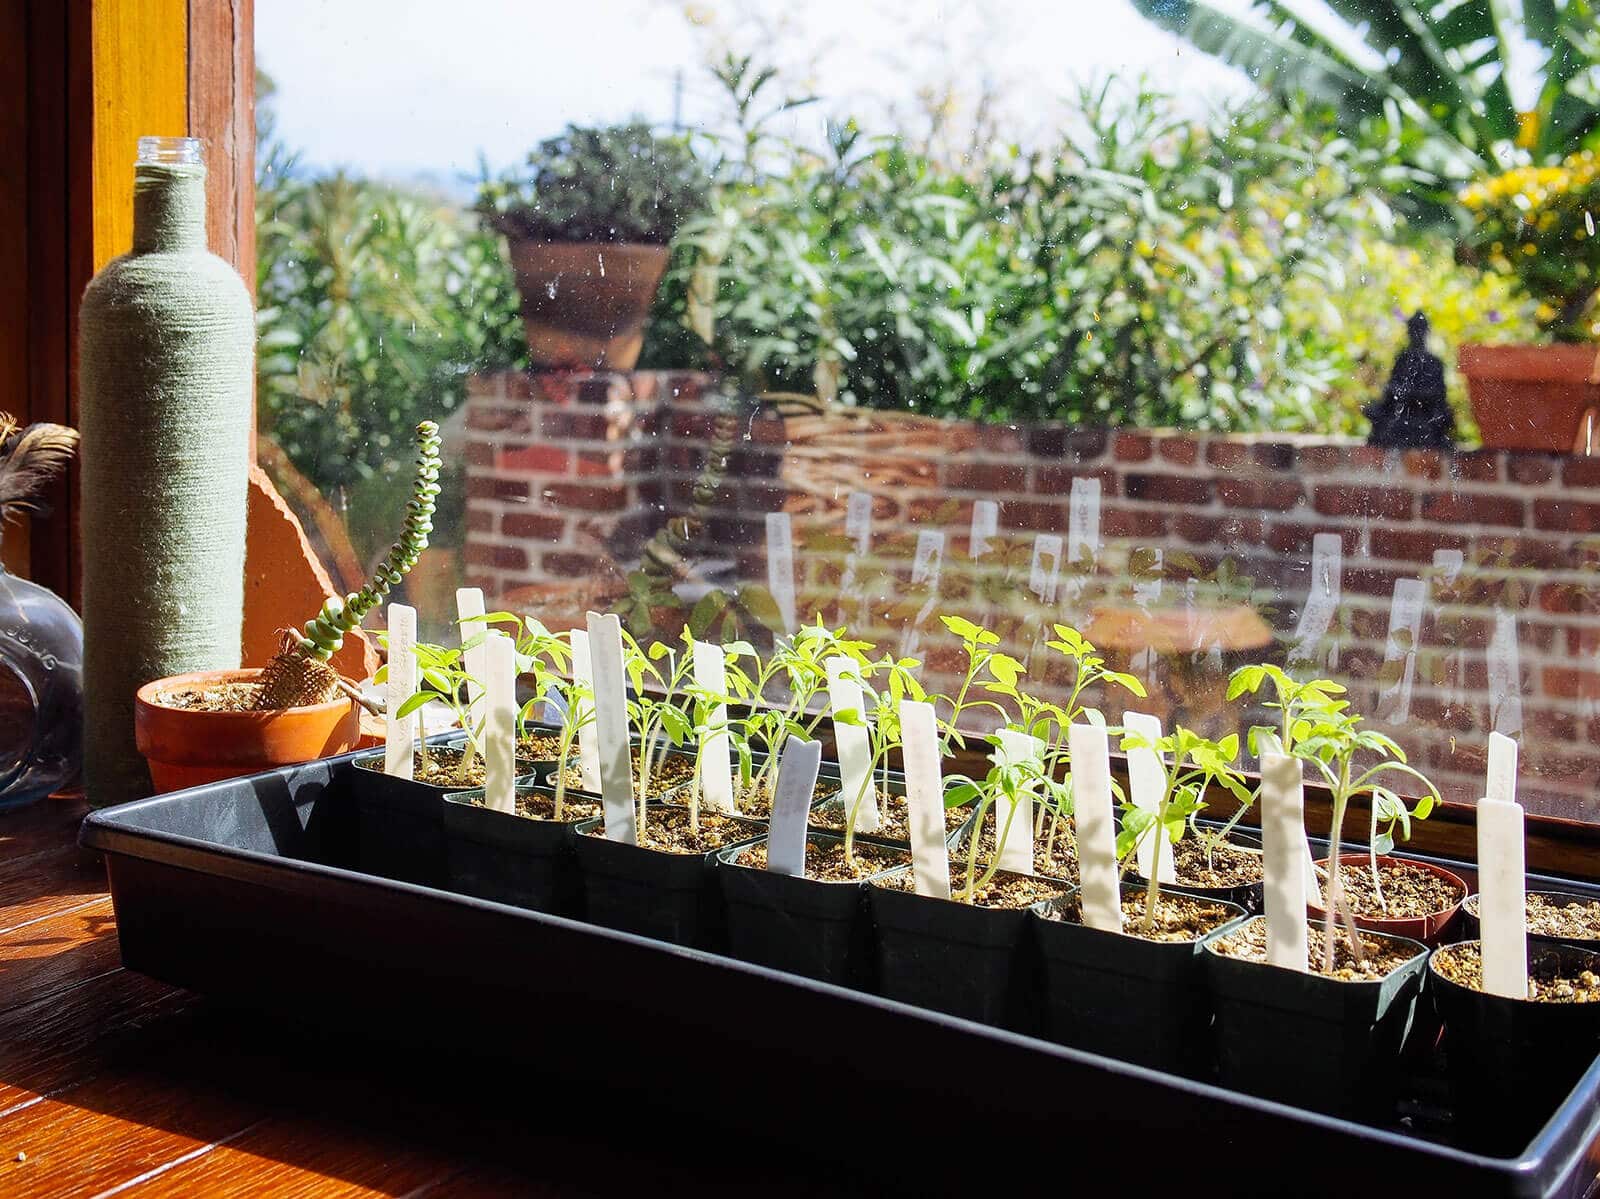 Indoor seedlings need to be acclimated to the outdoors before being transplanted